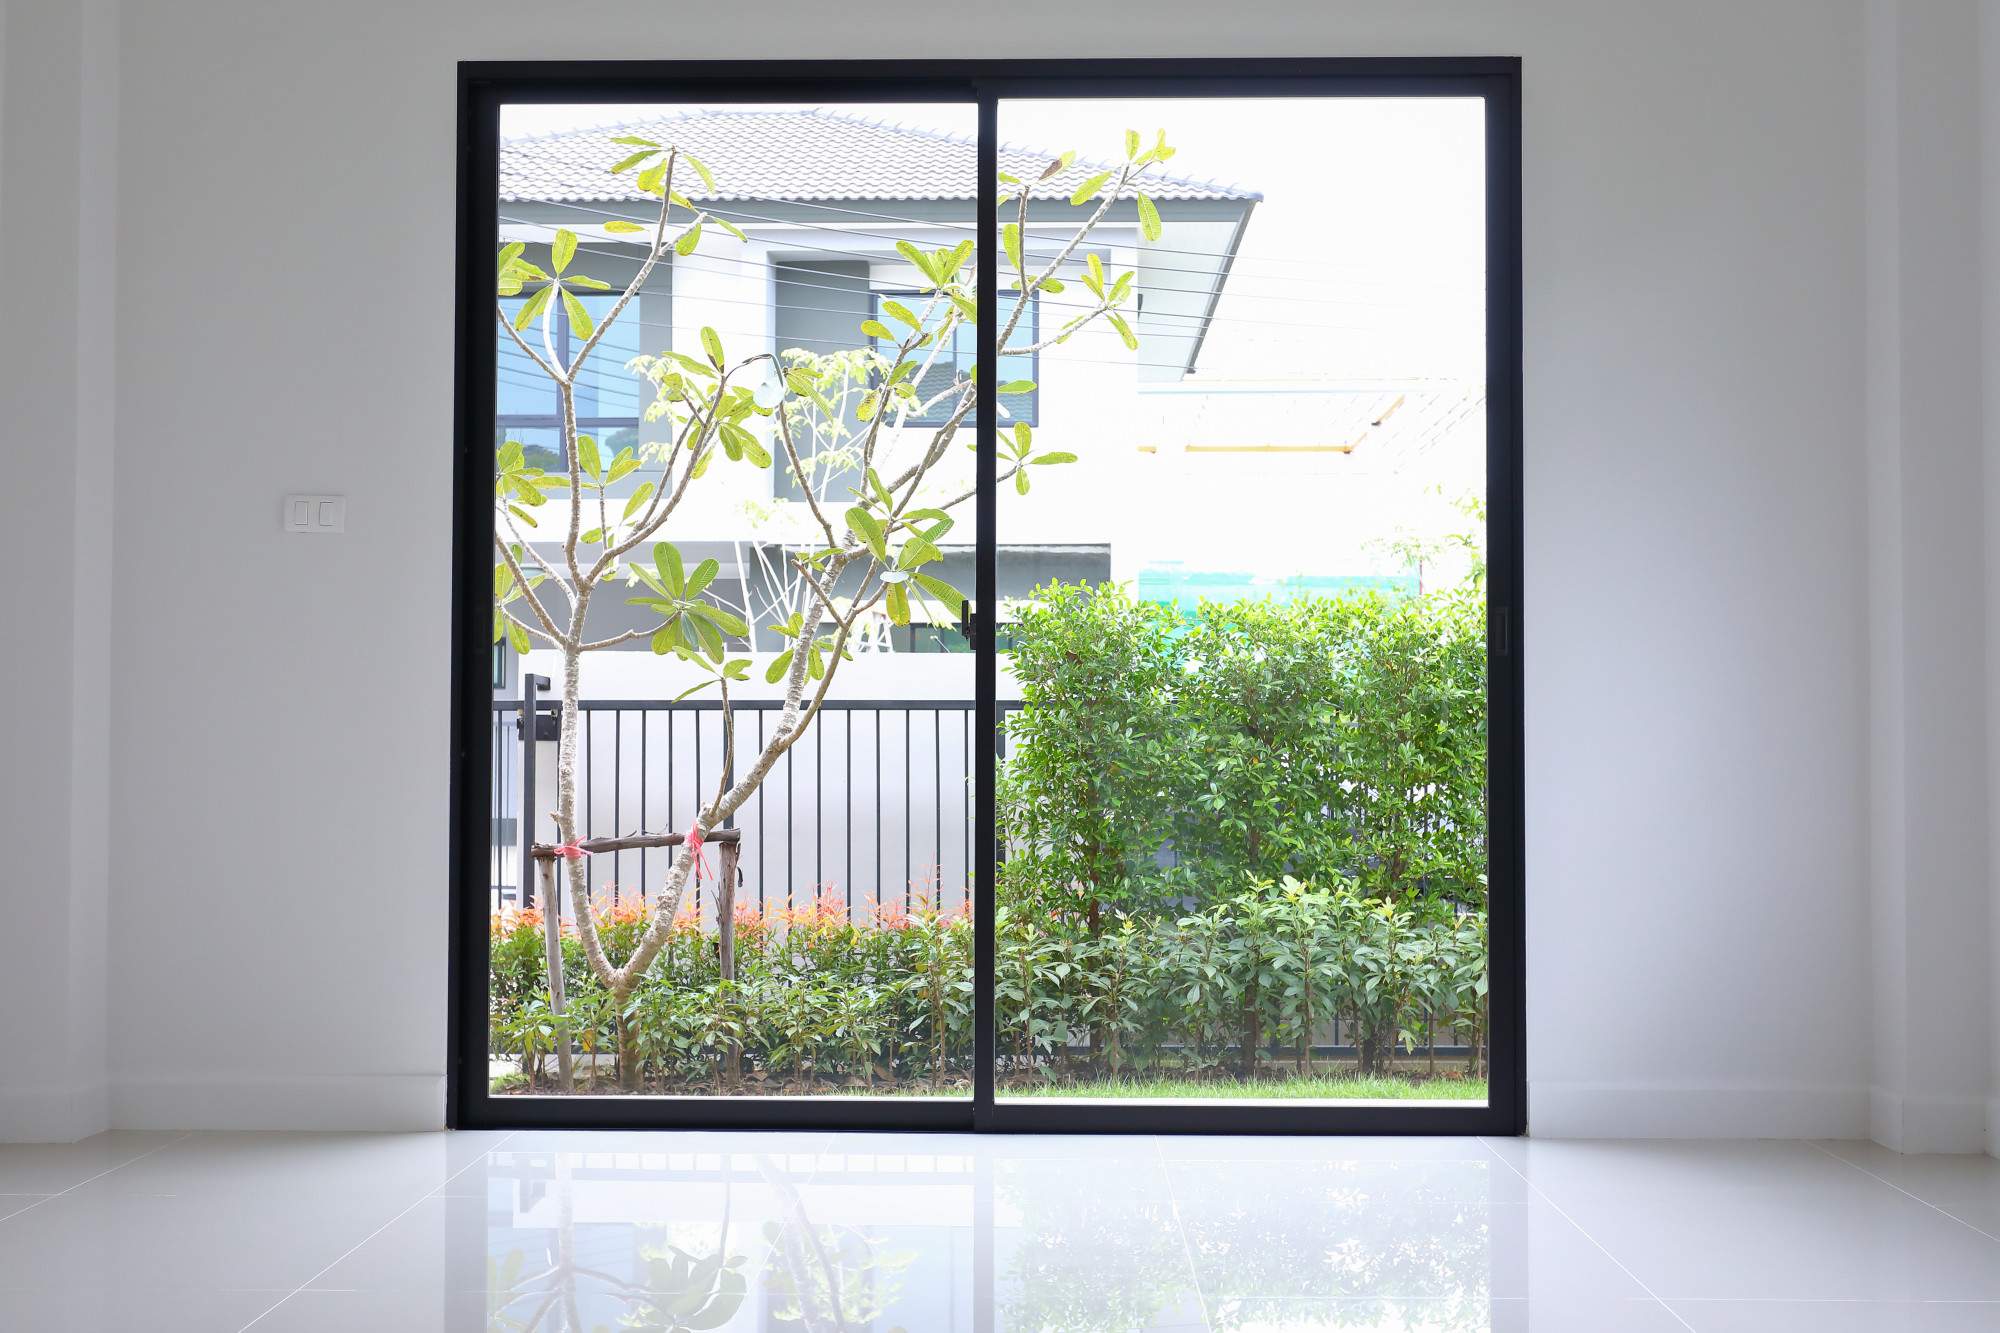 A Home Owner’s Guide to the Different Types of Sliding Glass Doors